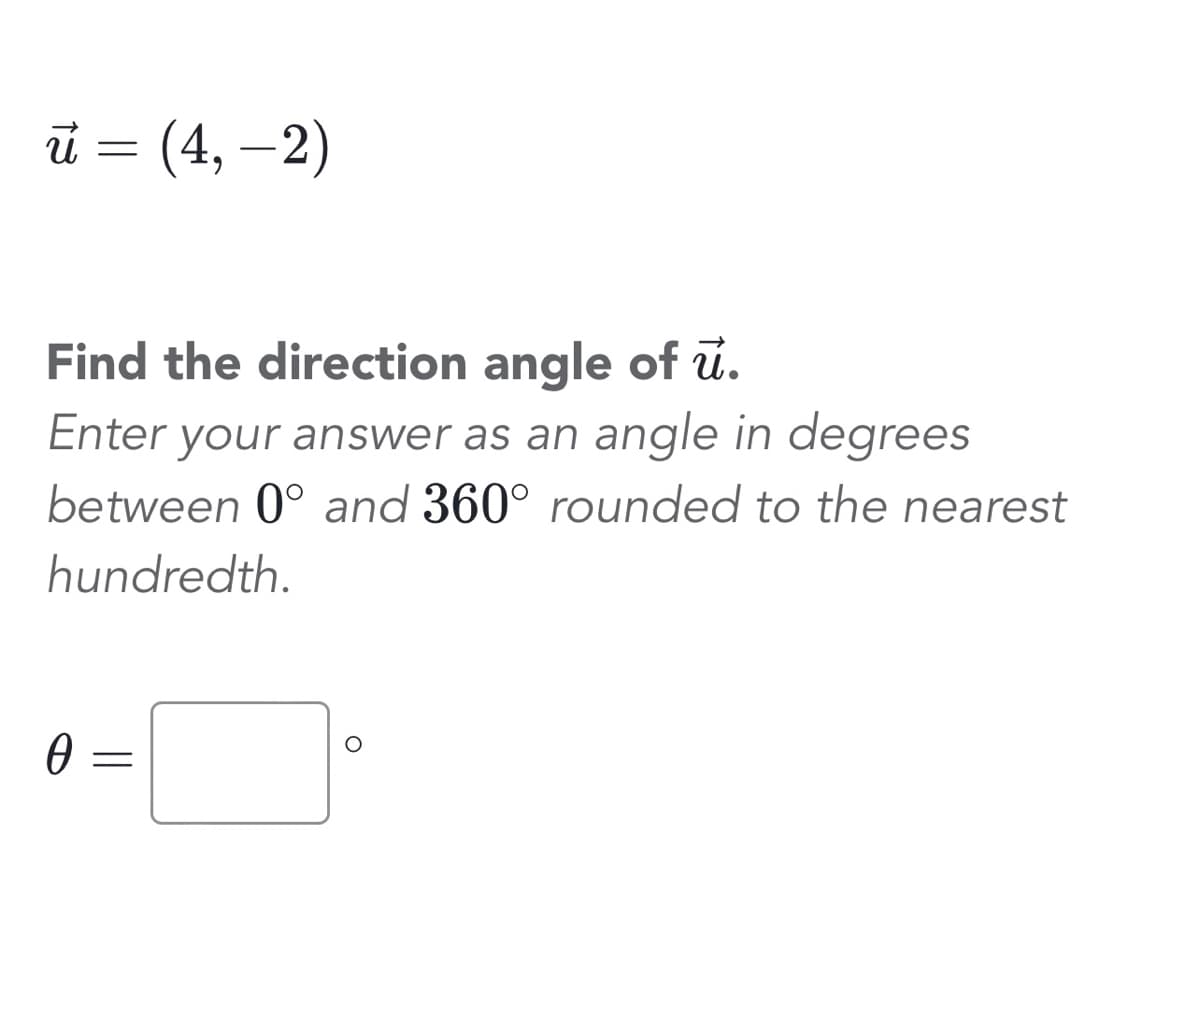 ū u = (4, -2)
Find the direction angle of u.
Enter your answer as an angle in degrees
between 0° and 360° rounded to the nearest
hundredth.
0 =